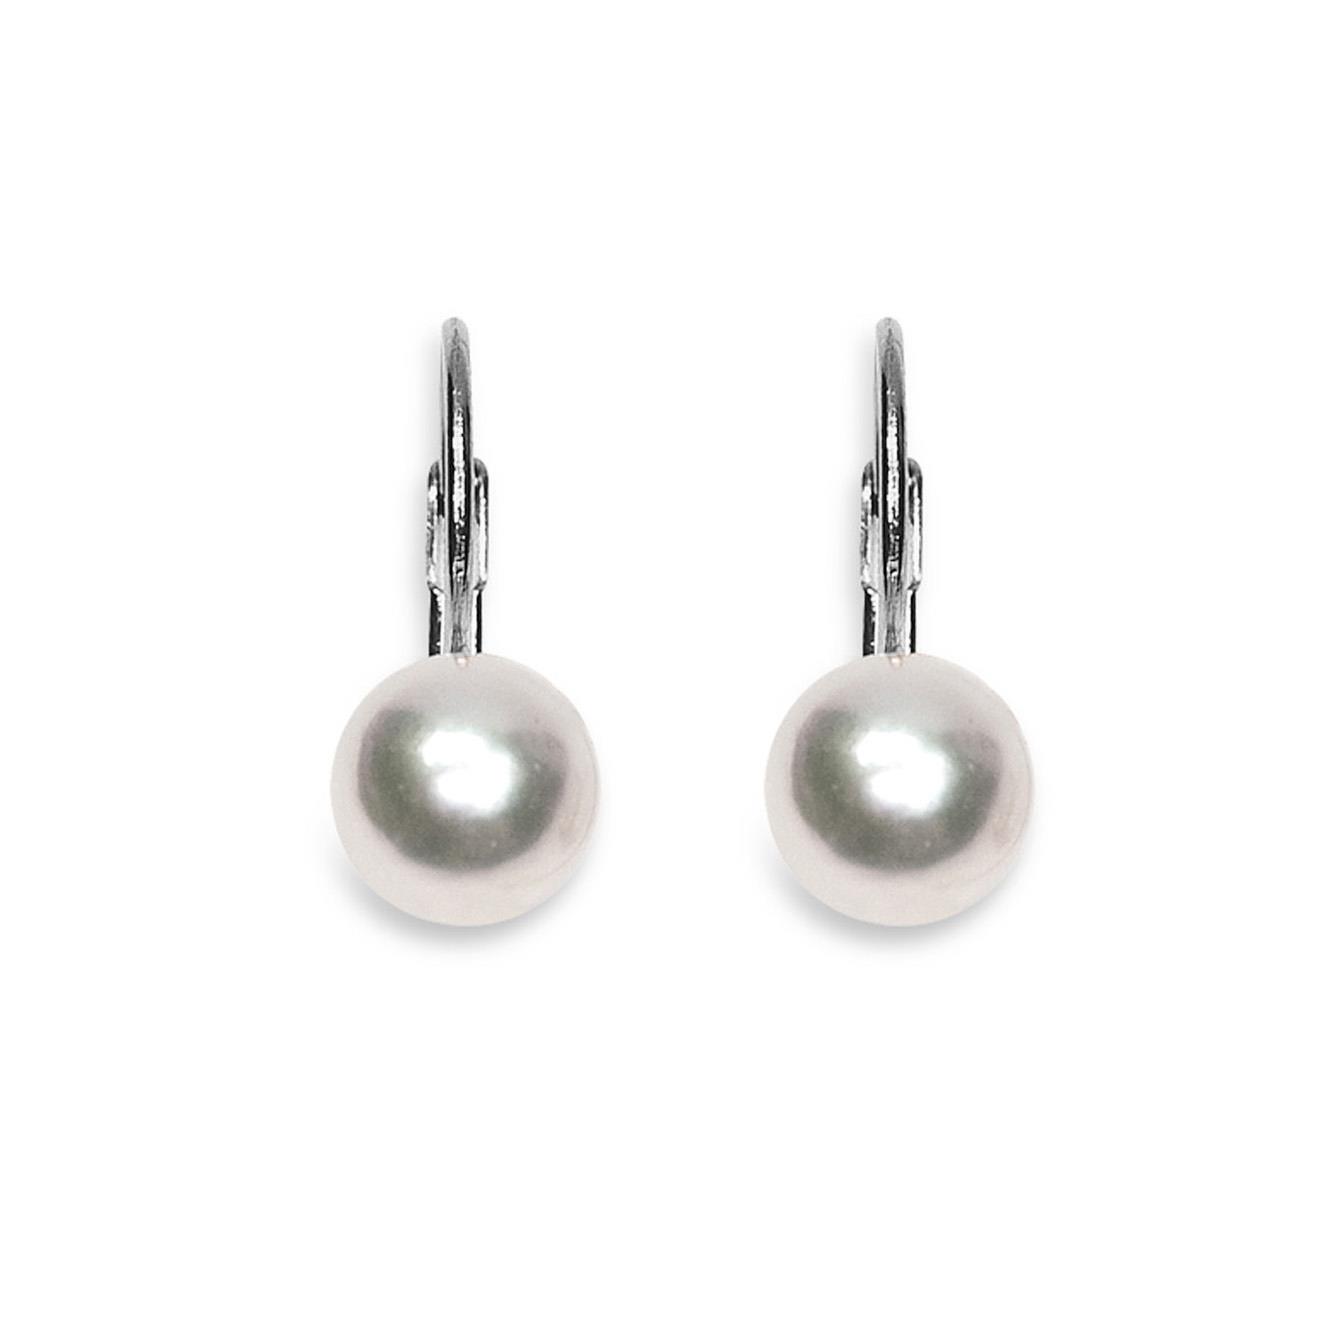 18kt white gold earrings with full pearlescent pearl - MAYUMI